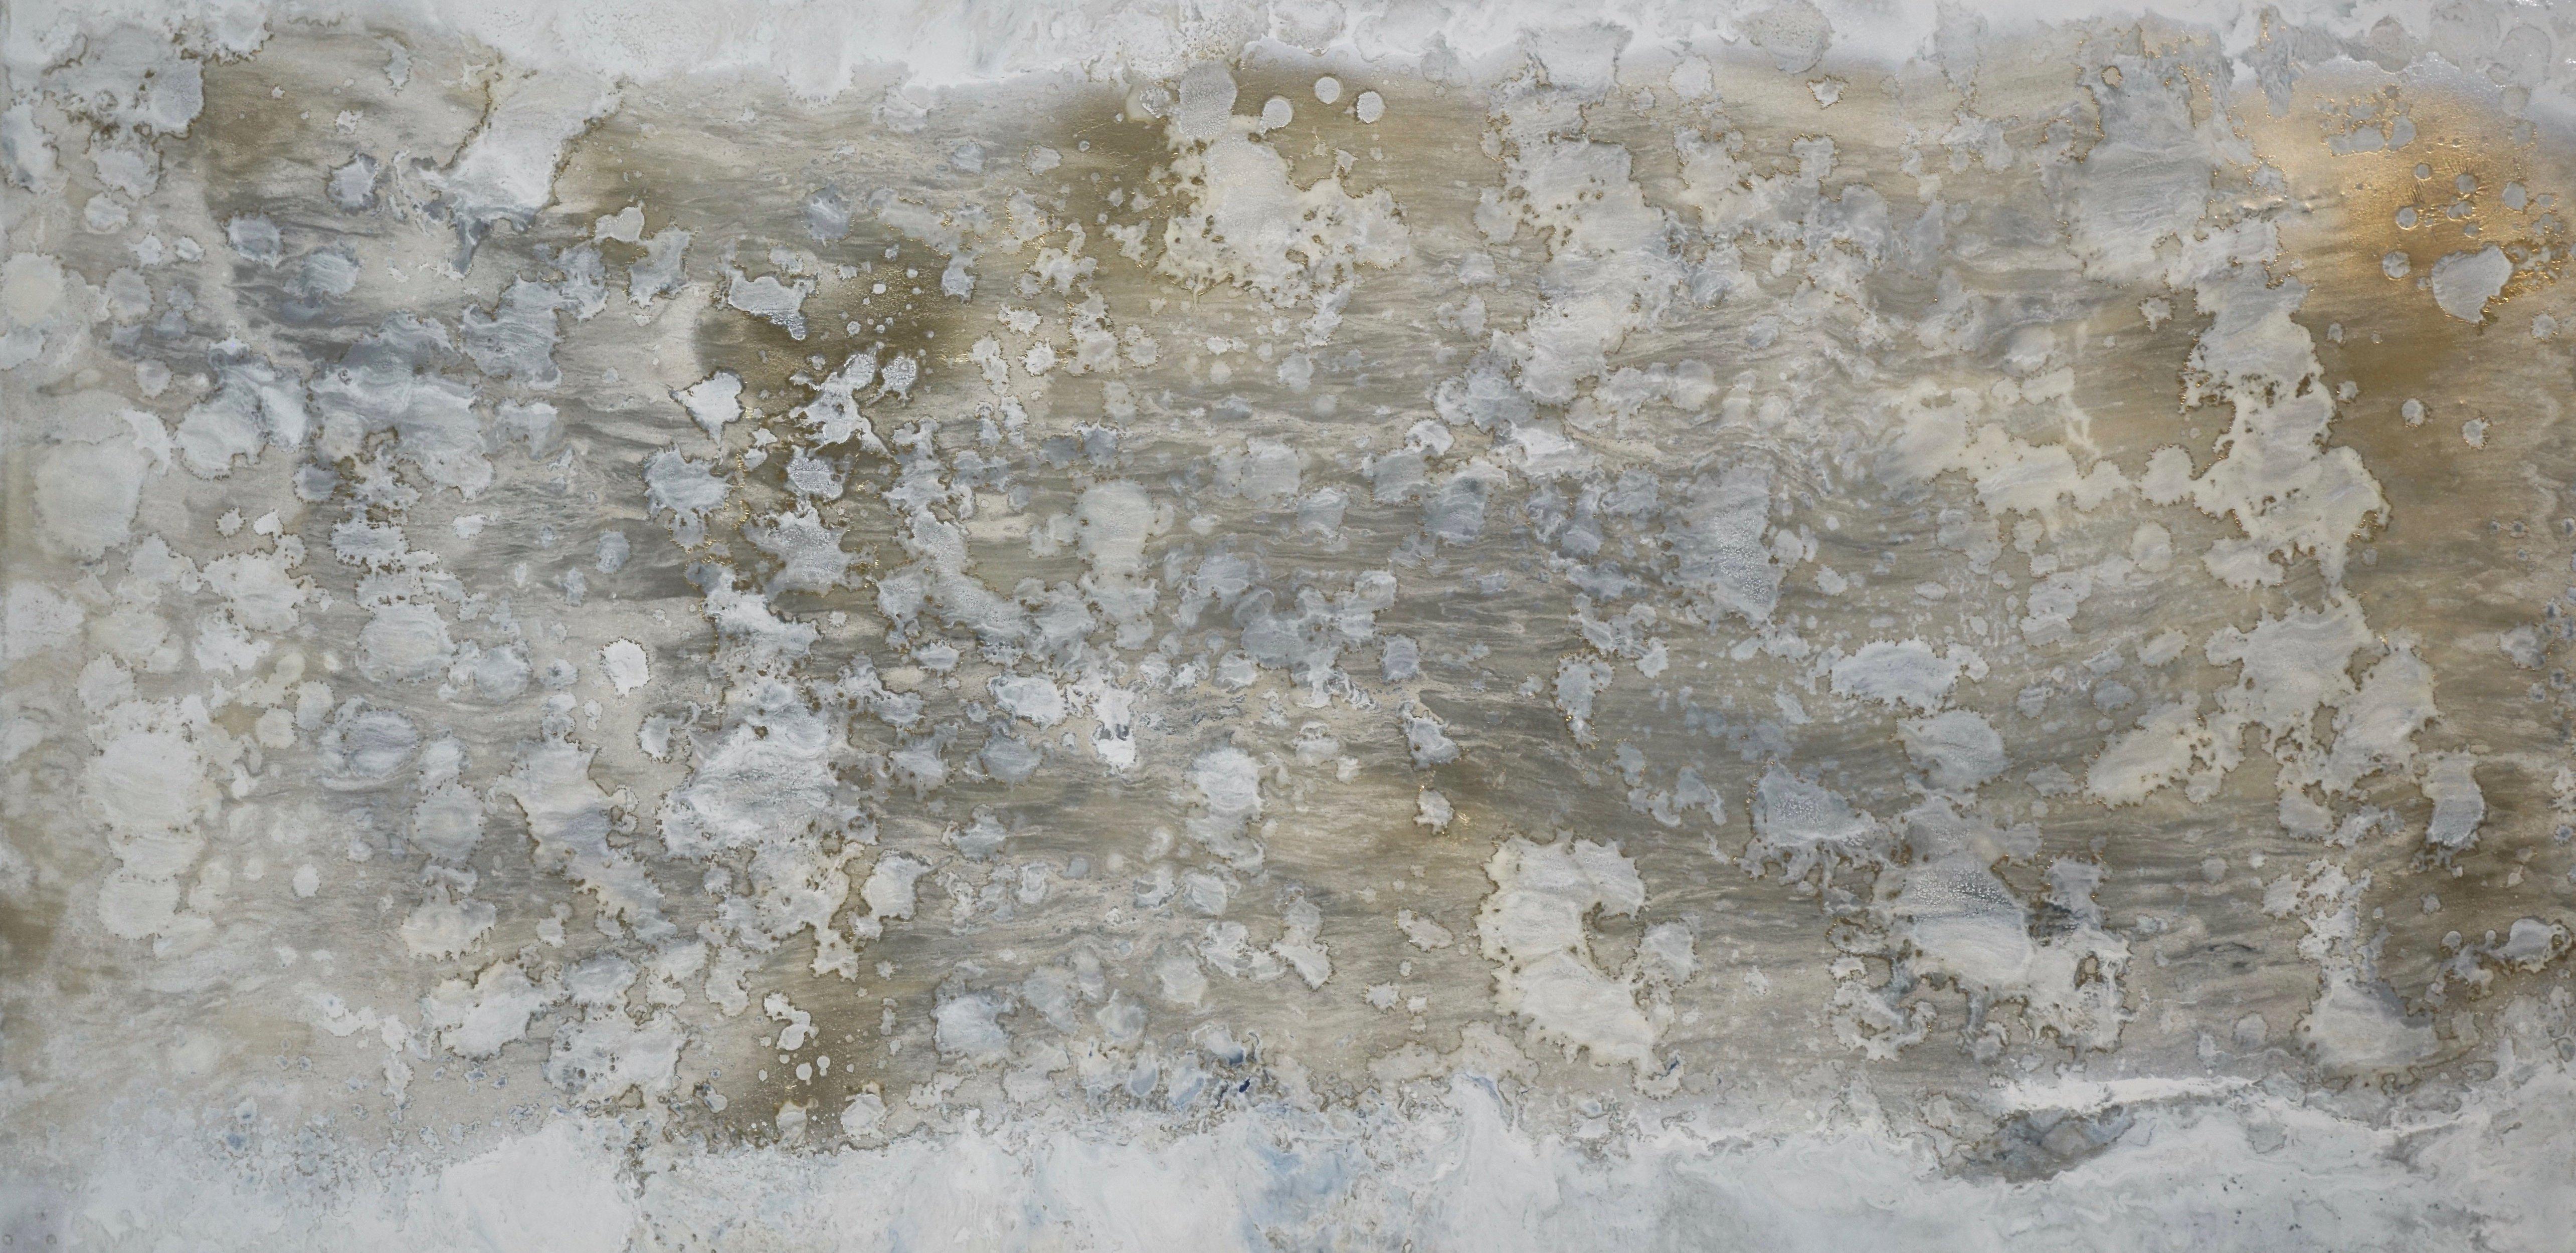 Alchemy and Ivory by Sarah Raskey is a 36 x 18 inch mixed media abstract painting on canvas. 
Serene white alchemically swept across a peaceful gold backdrop.

Sarah Raskey is a visionary artist, a licensed clinical professional psychotherapist, a